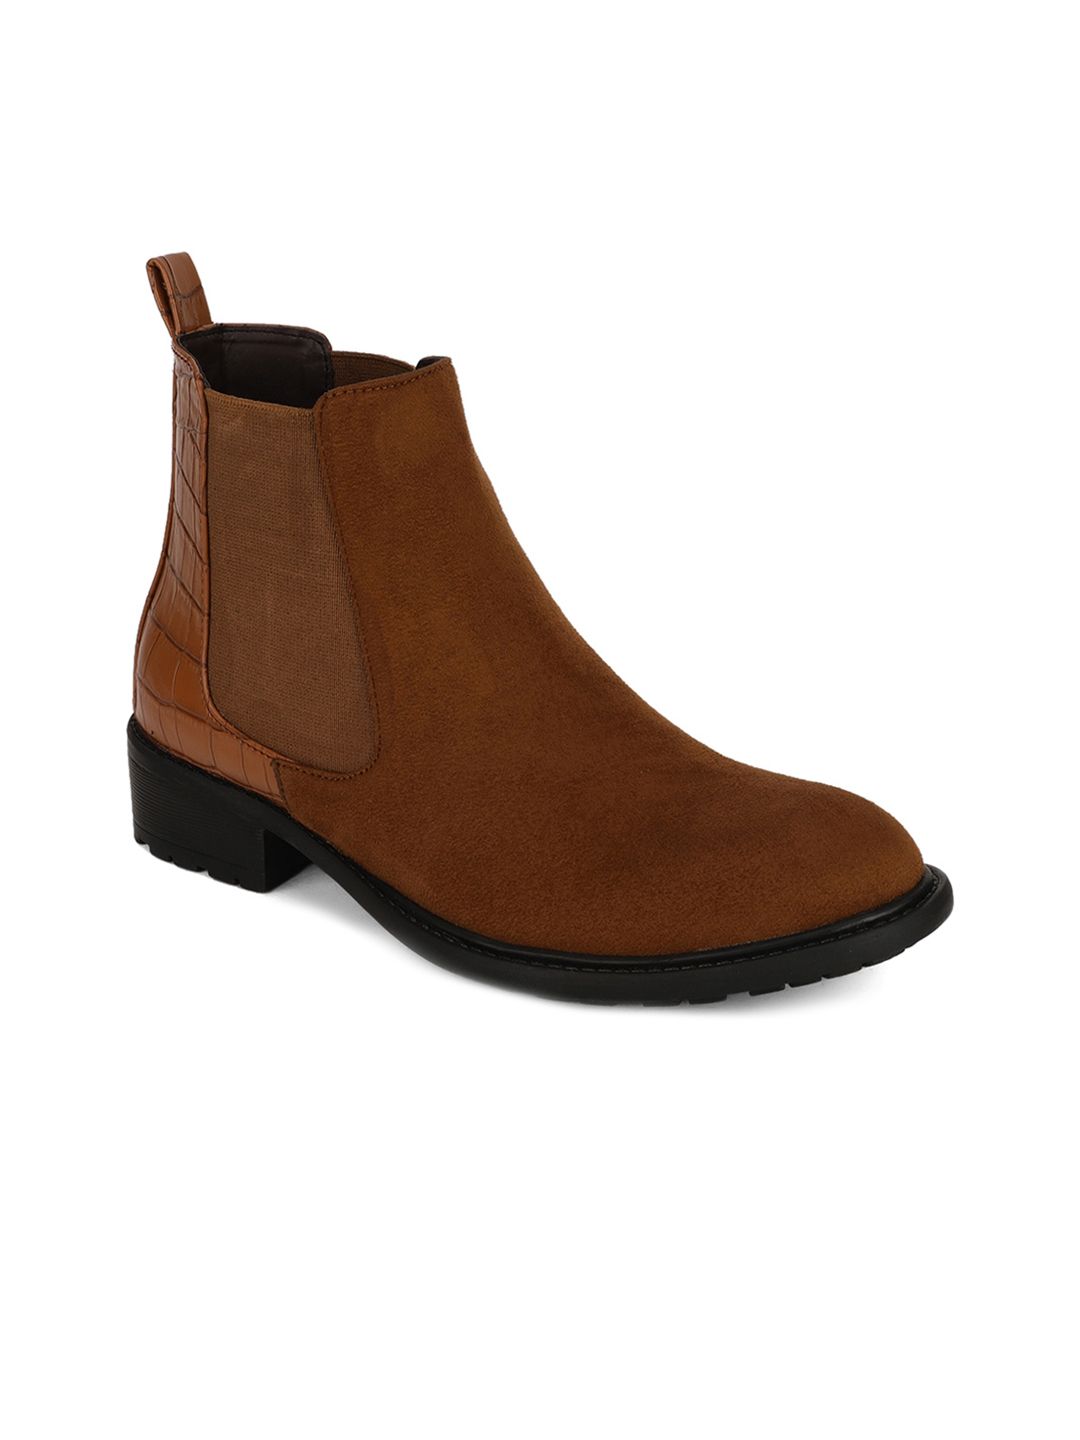 Bruno Manetti Camel Brown Suede Block Heeled Boots Price in India